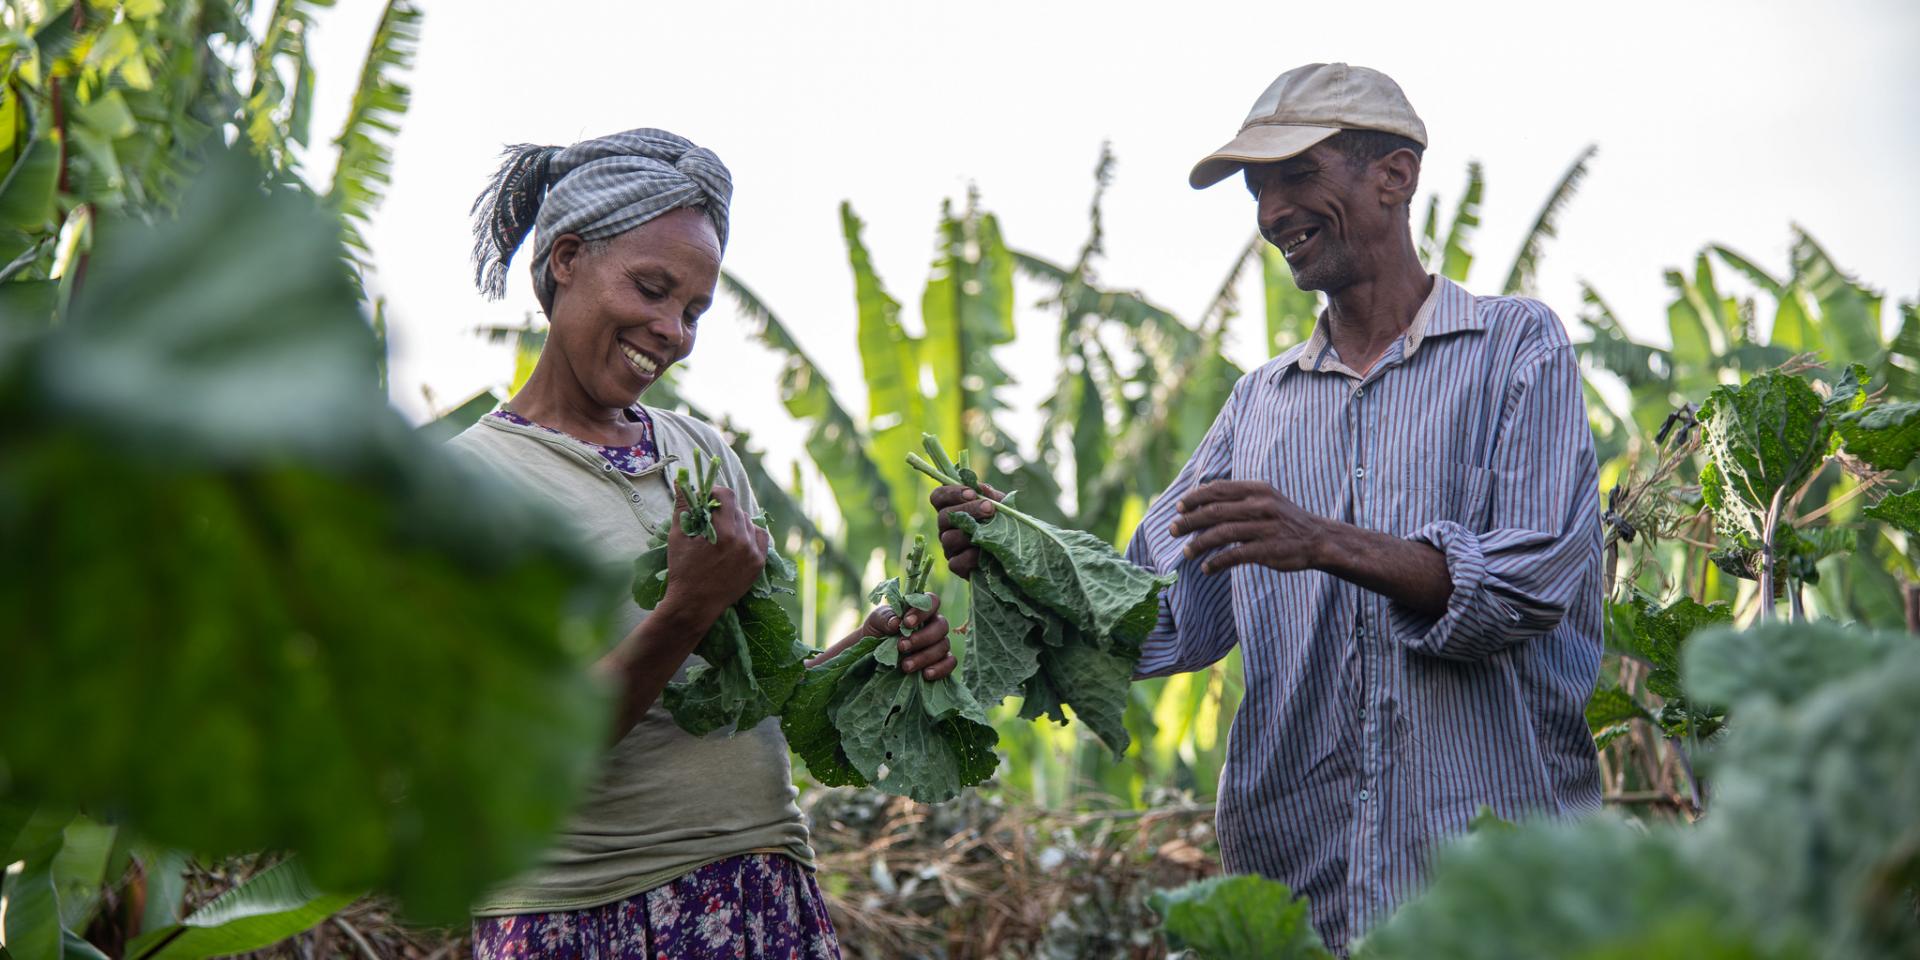 Askale Lombamo and her husband Abamo Lombamo in their garden in Doyogena District, Ethiopia